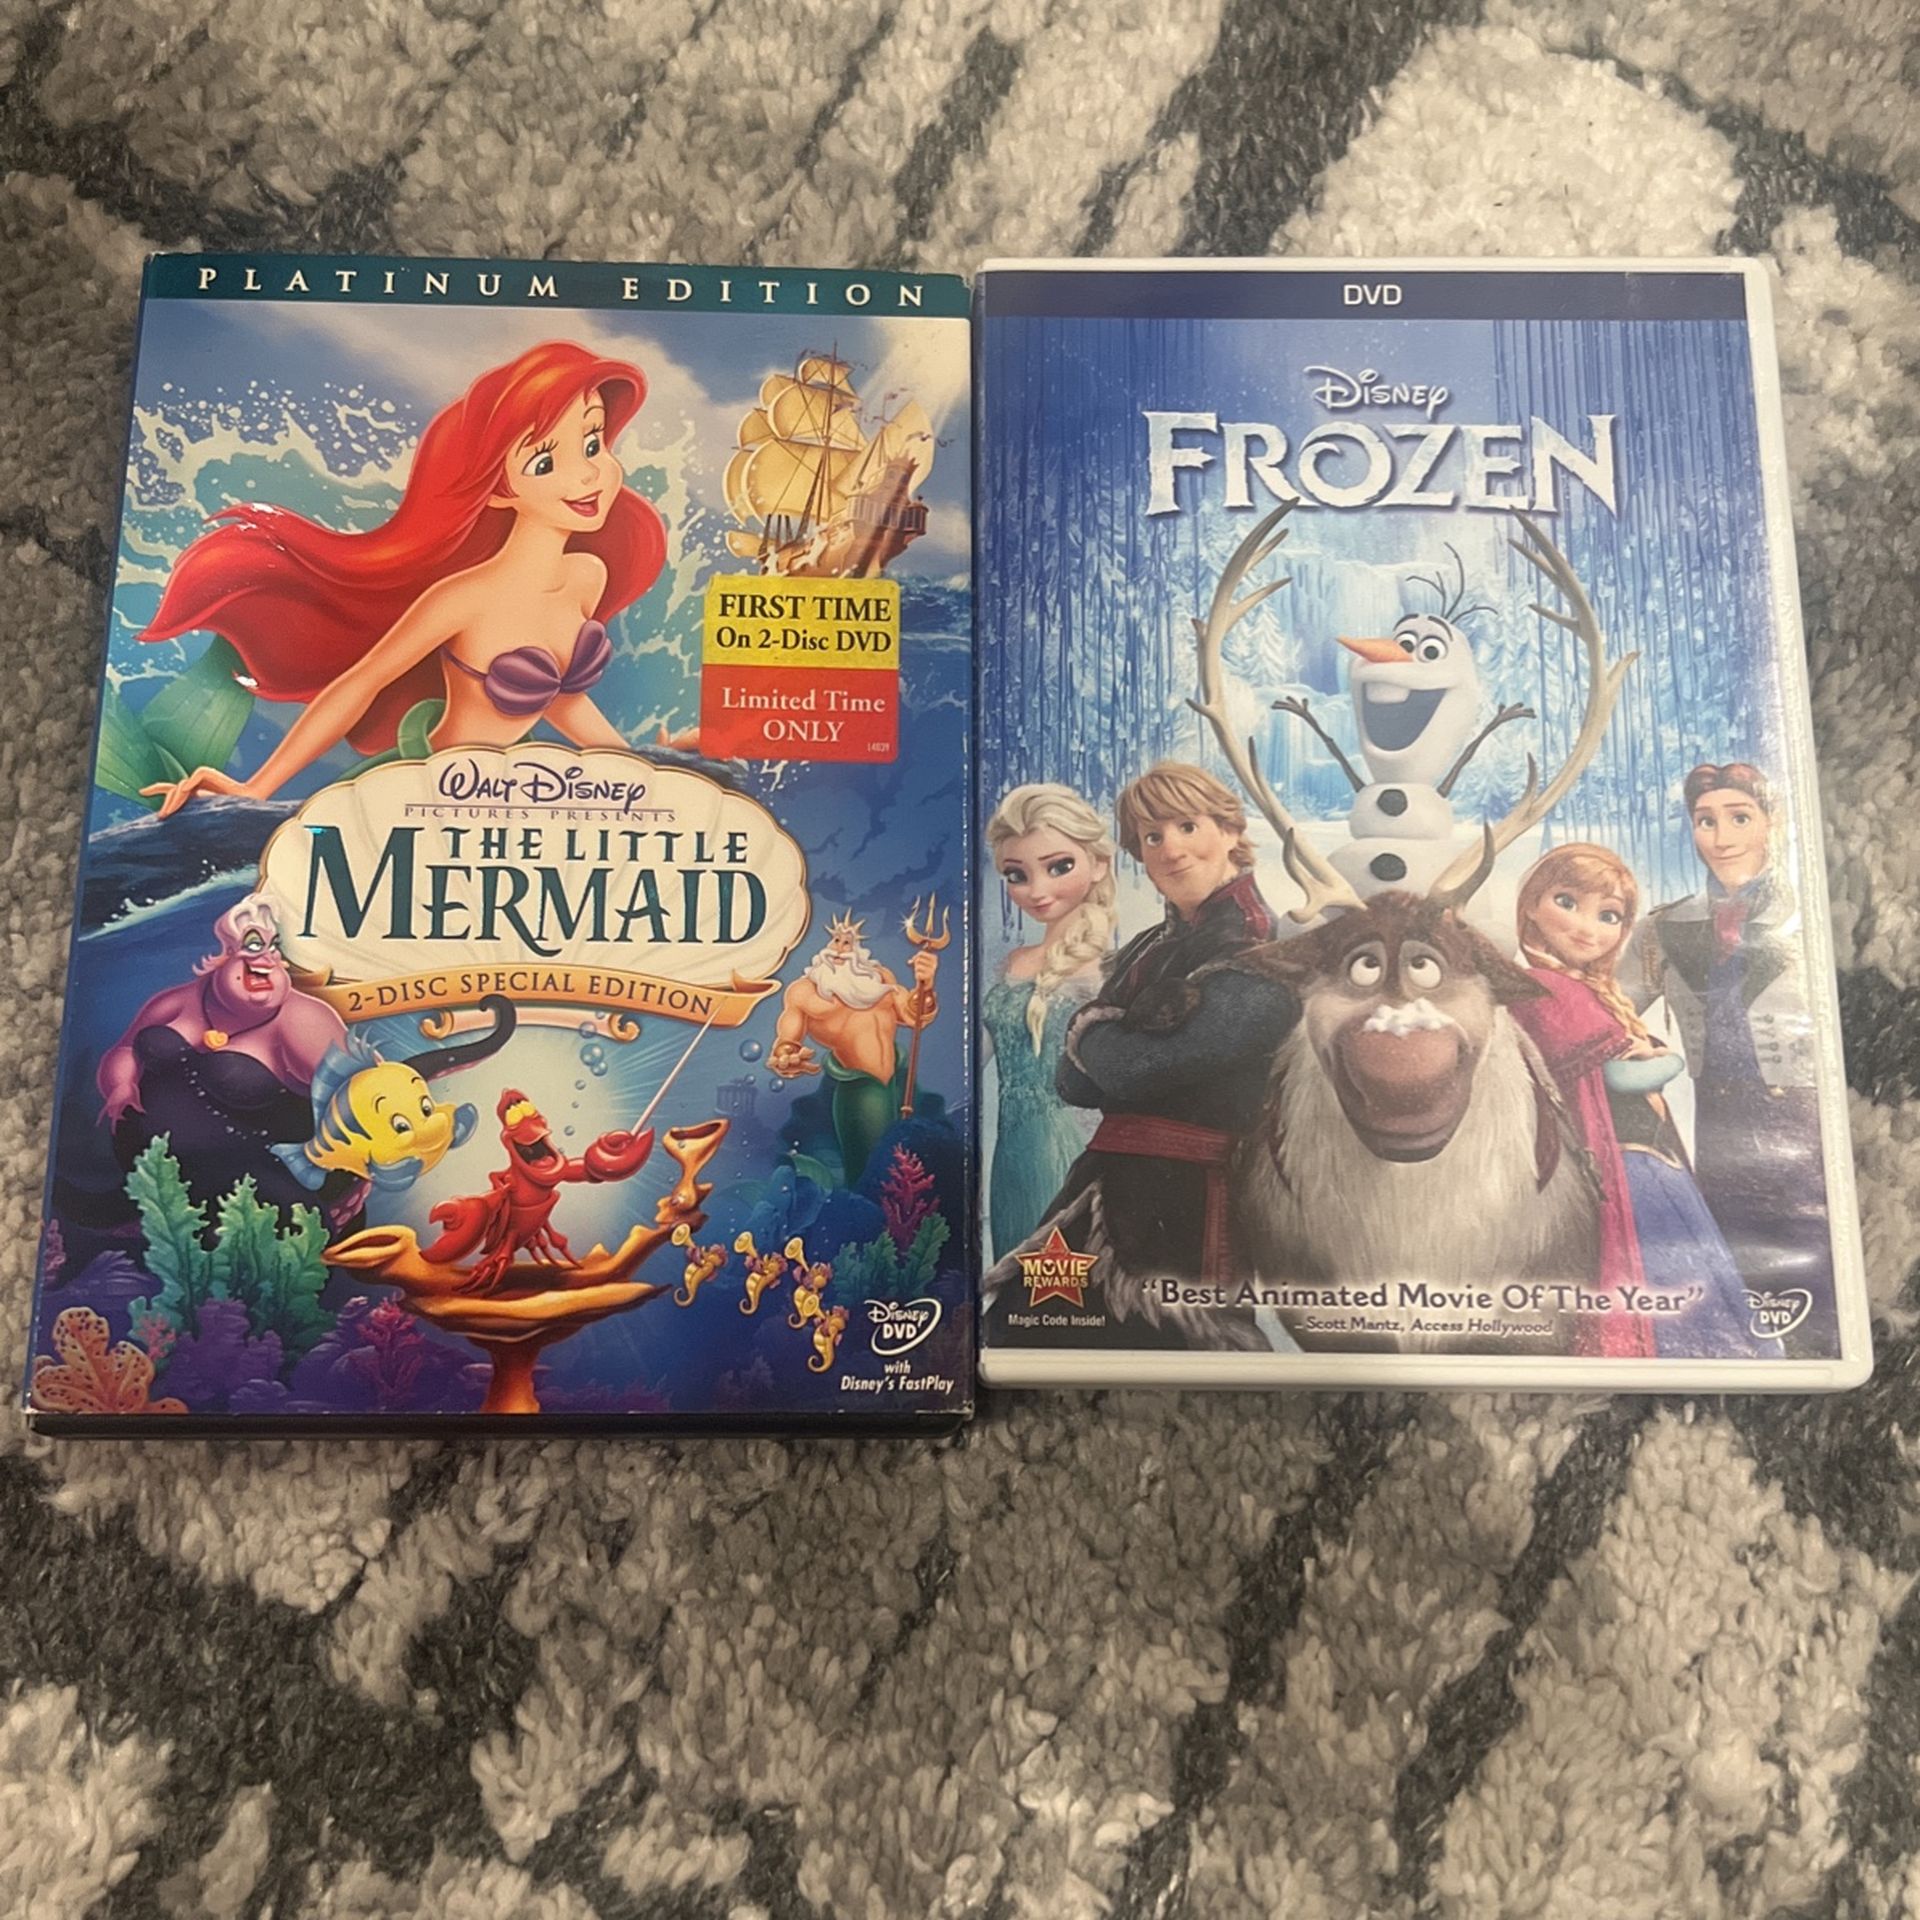 The Little Mermaid, Two Disc Special Edition, And Frozen DVD Set